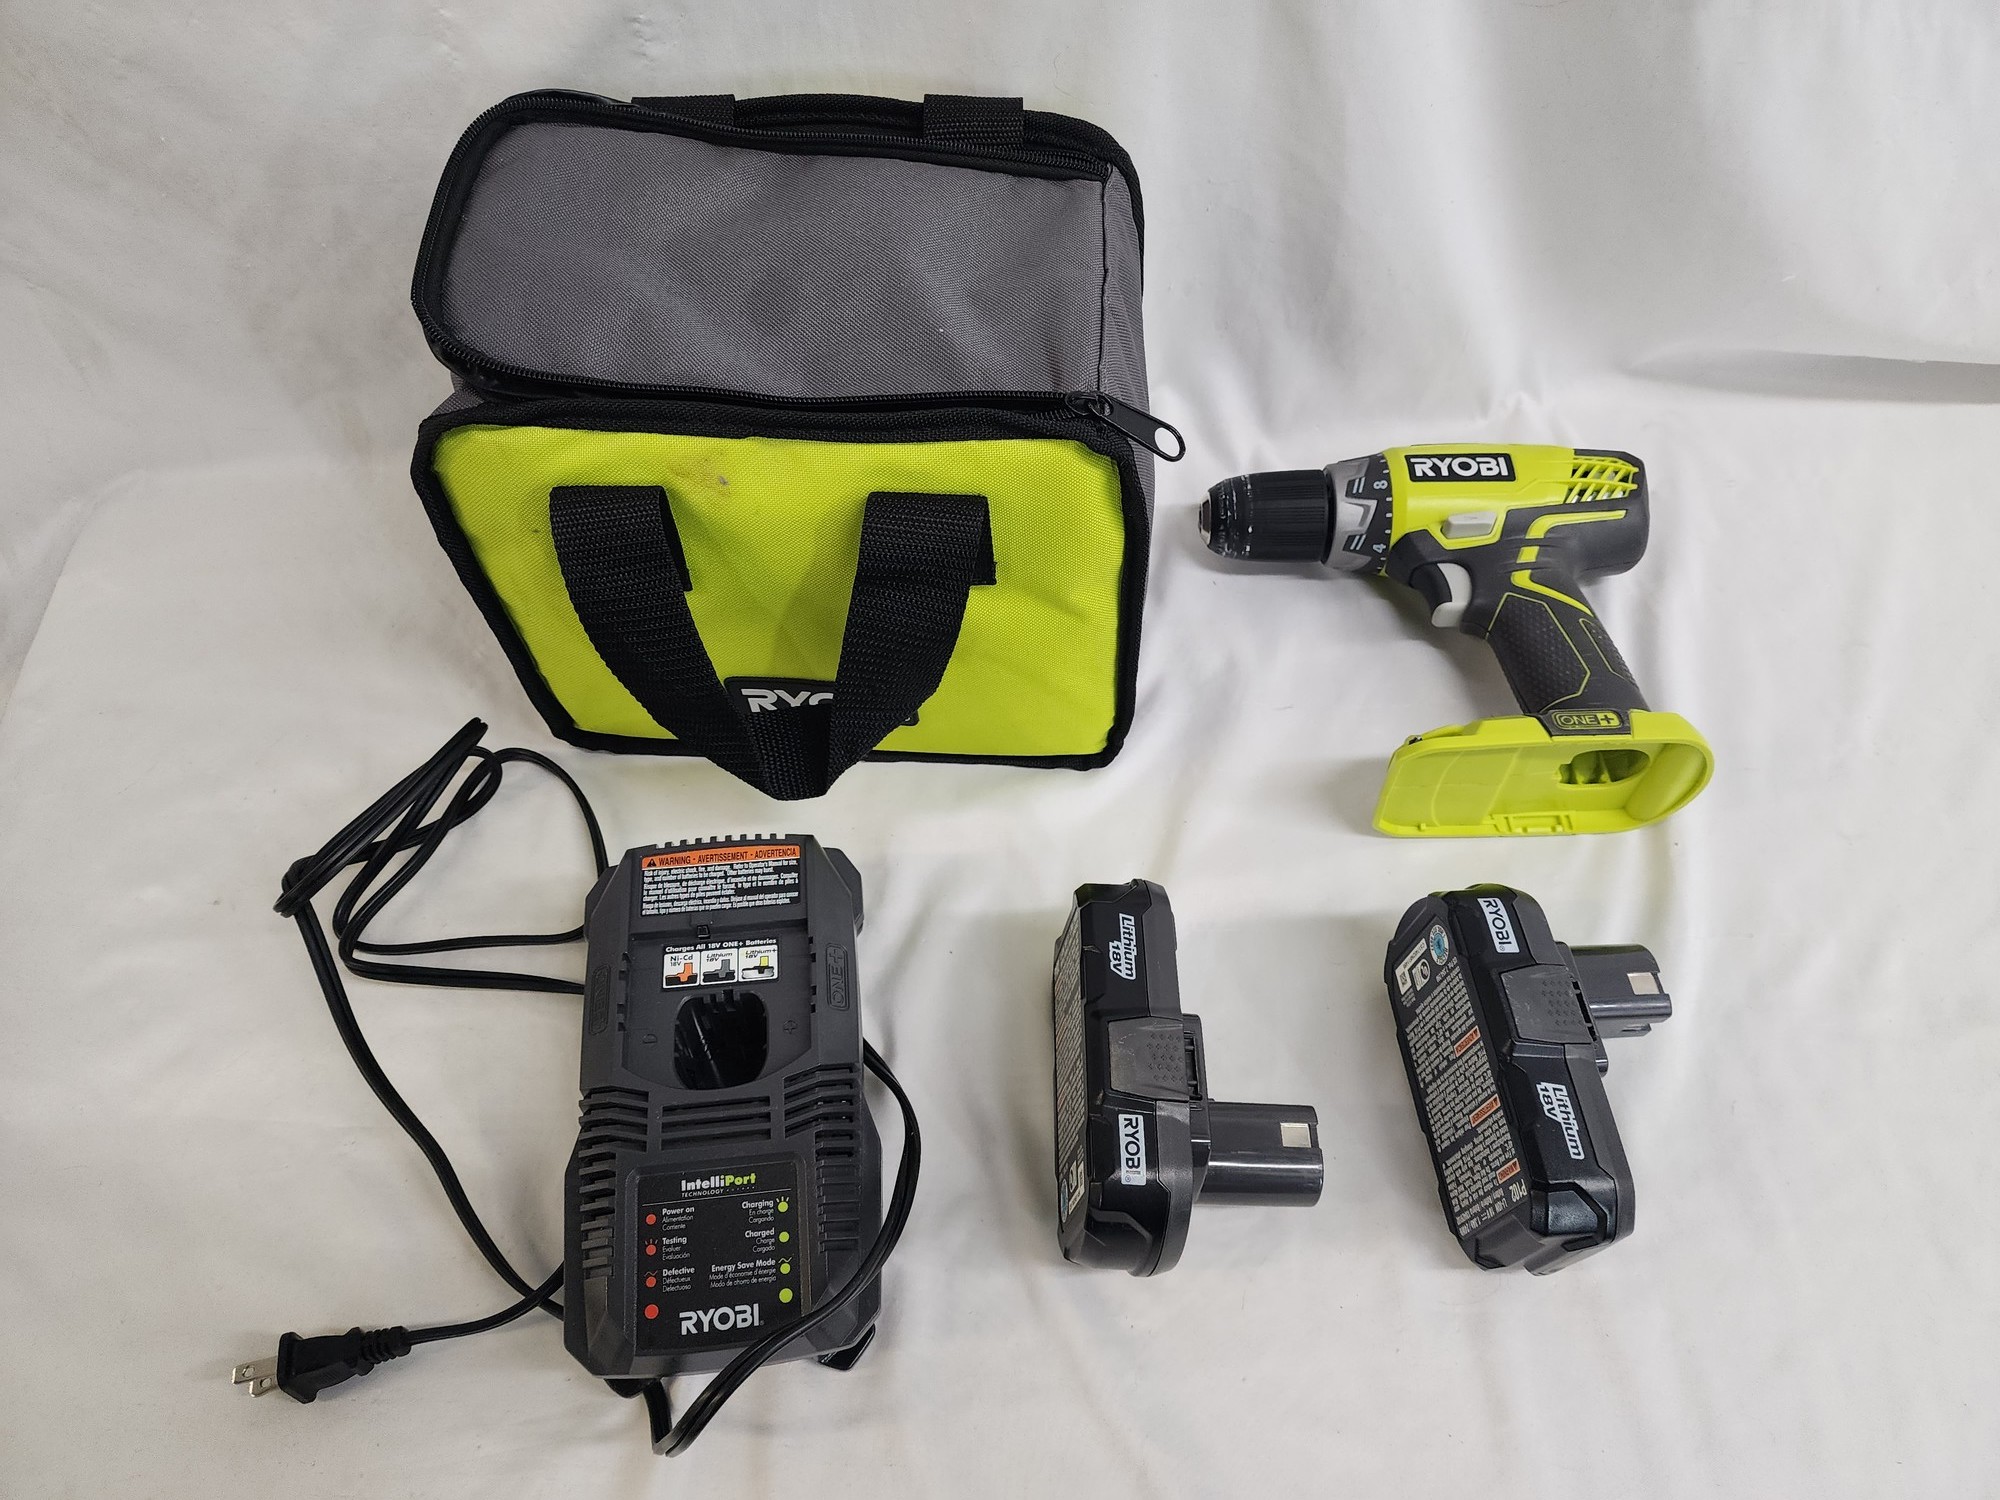 4 Black and Decker Firestorm Brand Power Tools Charger and 2 Batteries  included and a stud finder - Tools - Salem, Ohio